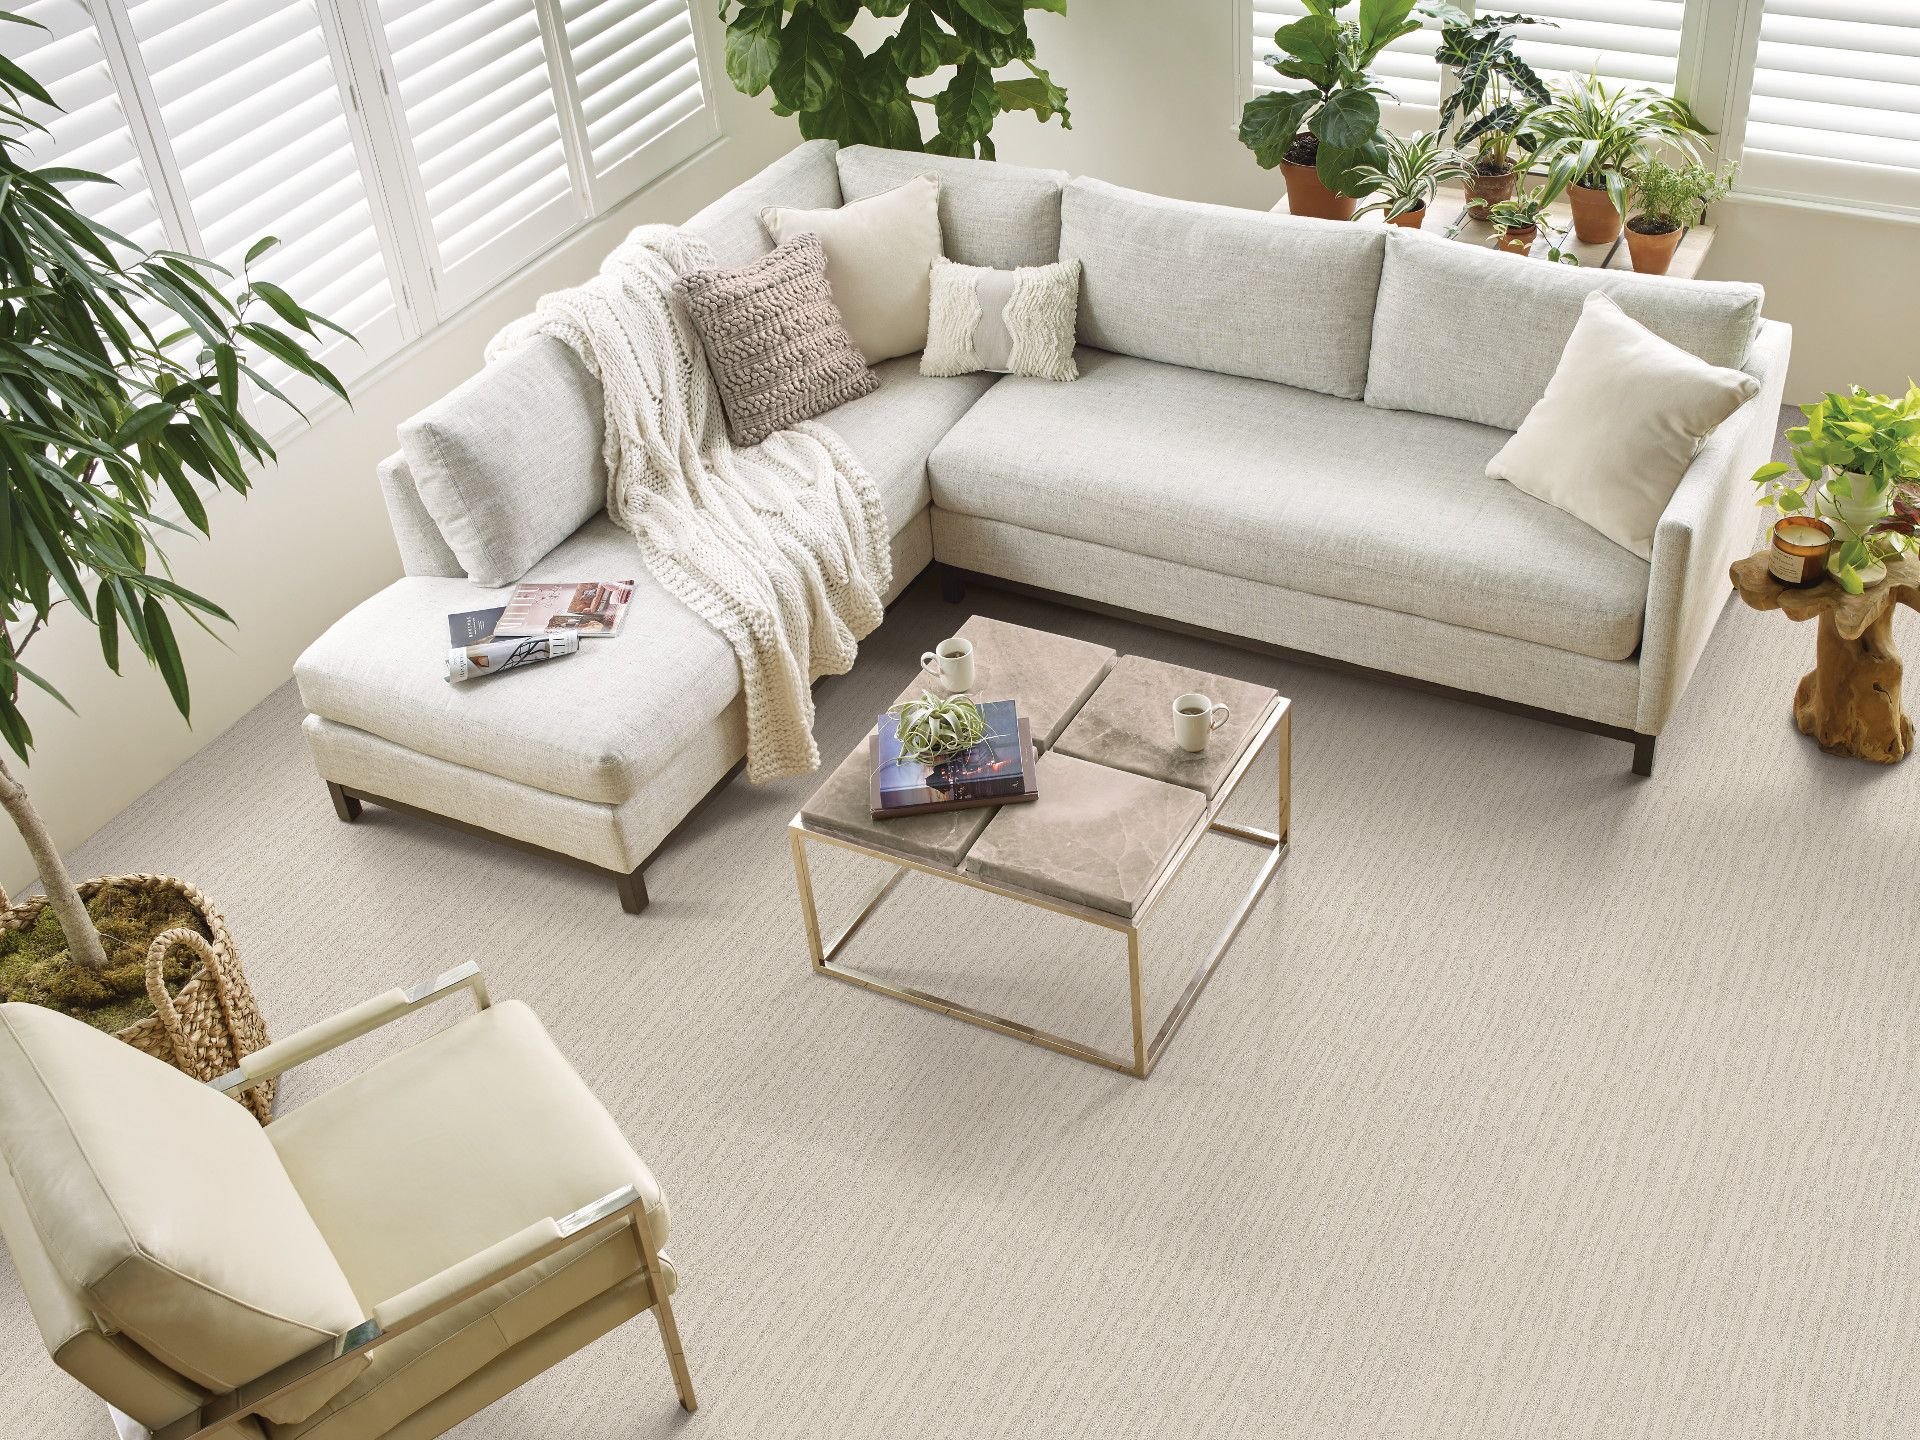 Large living room with white couch on carpet from Camarillo Interiors in San Jose